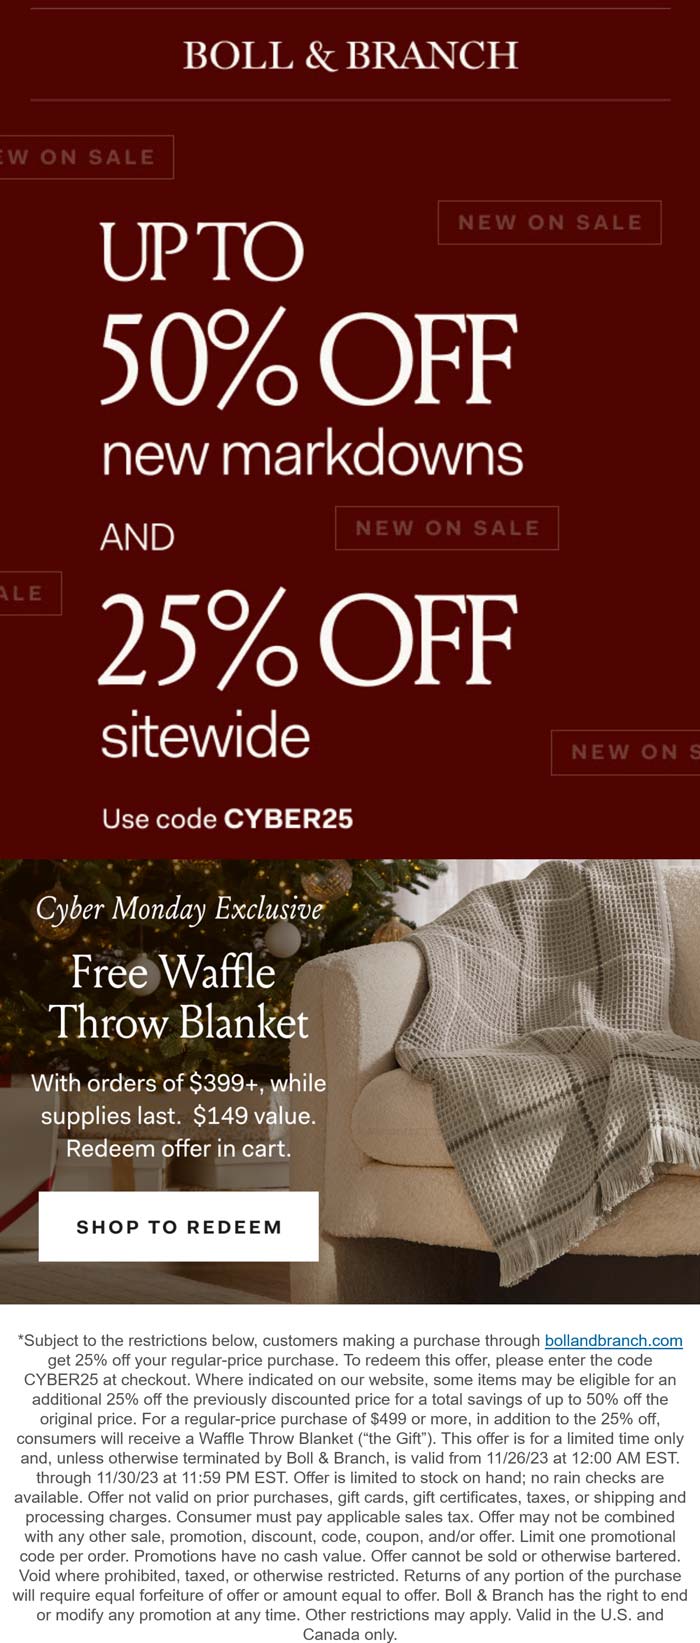 25% off everything + free waffle blanket on $400 at Boll & Branch via promo code CYBER25 #bollbranch